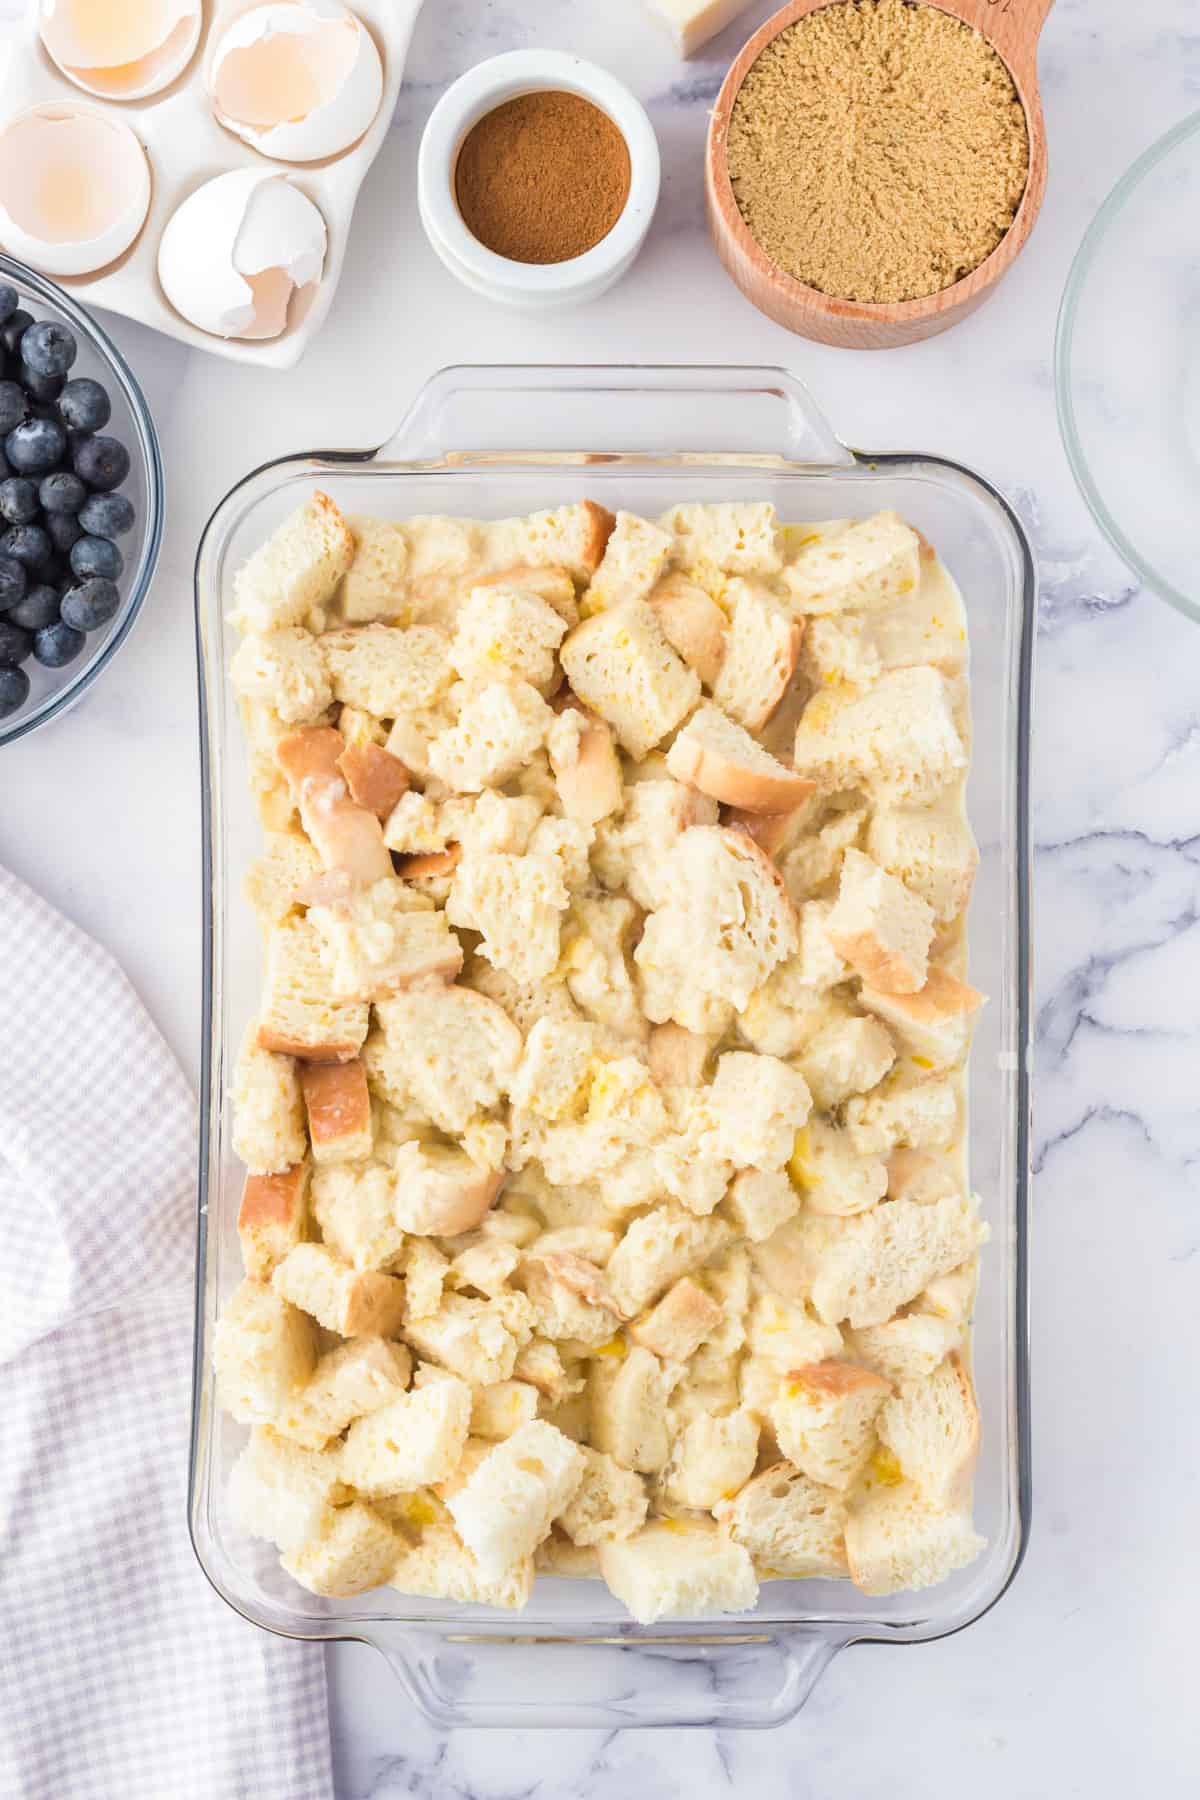 Casserole dish filled with cubed bread.